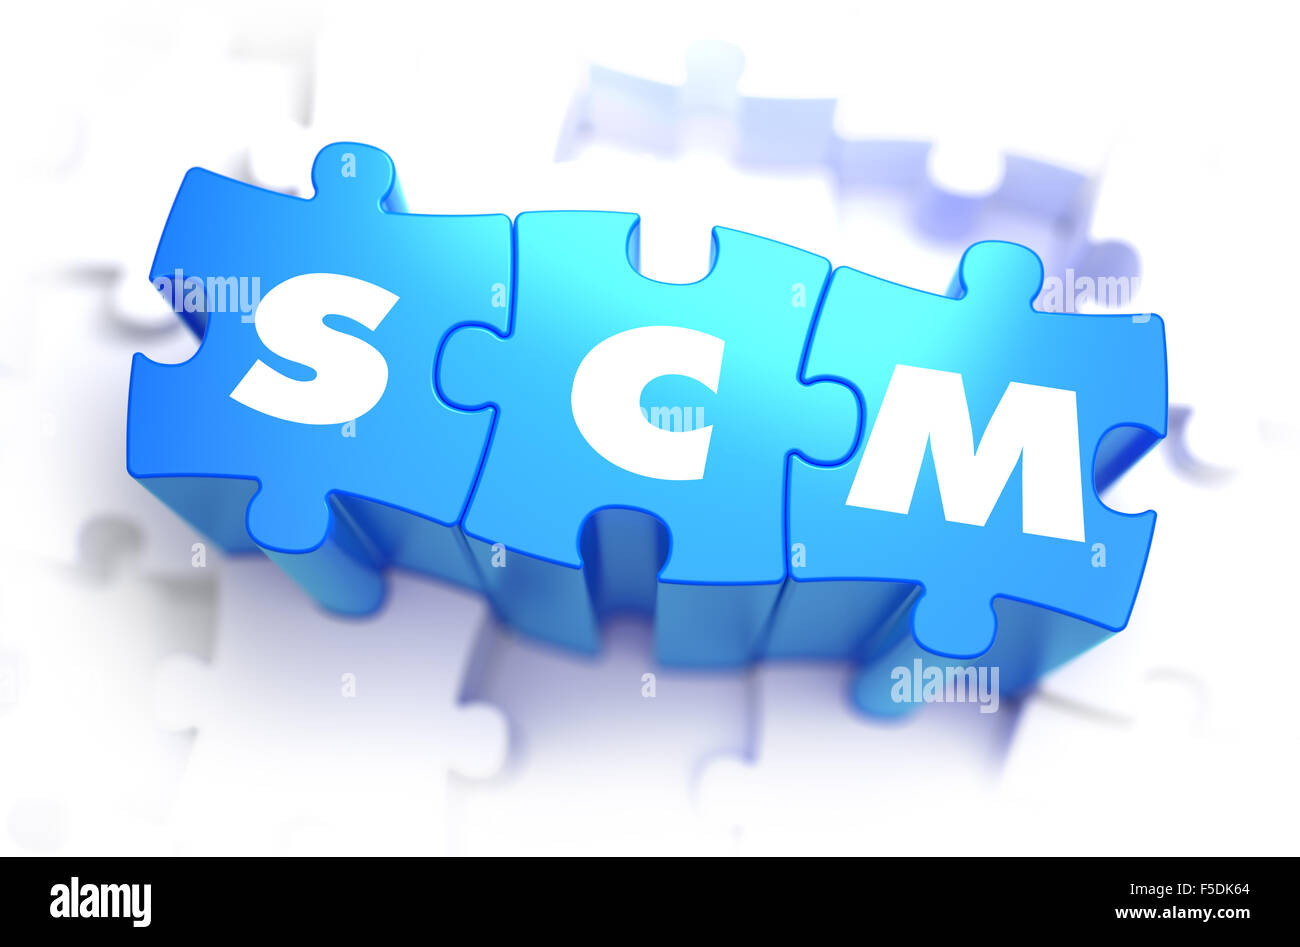 Scm Stock Photos And Scm Stock Images Alamy